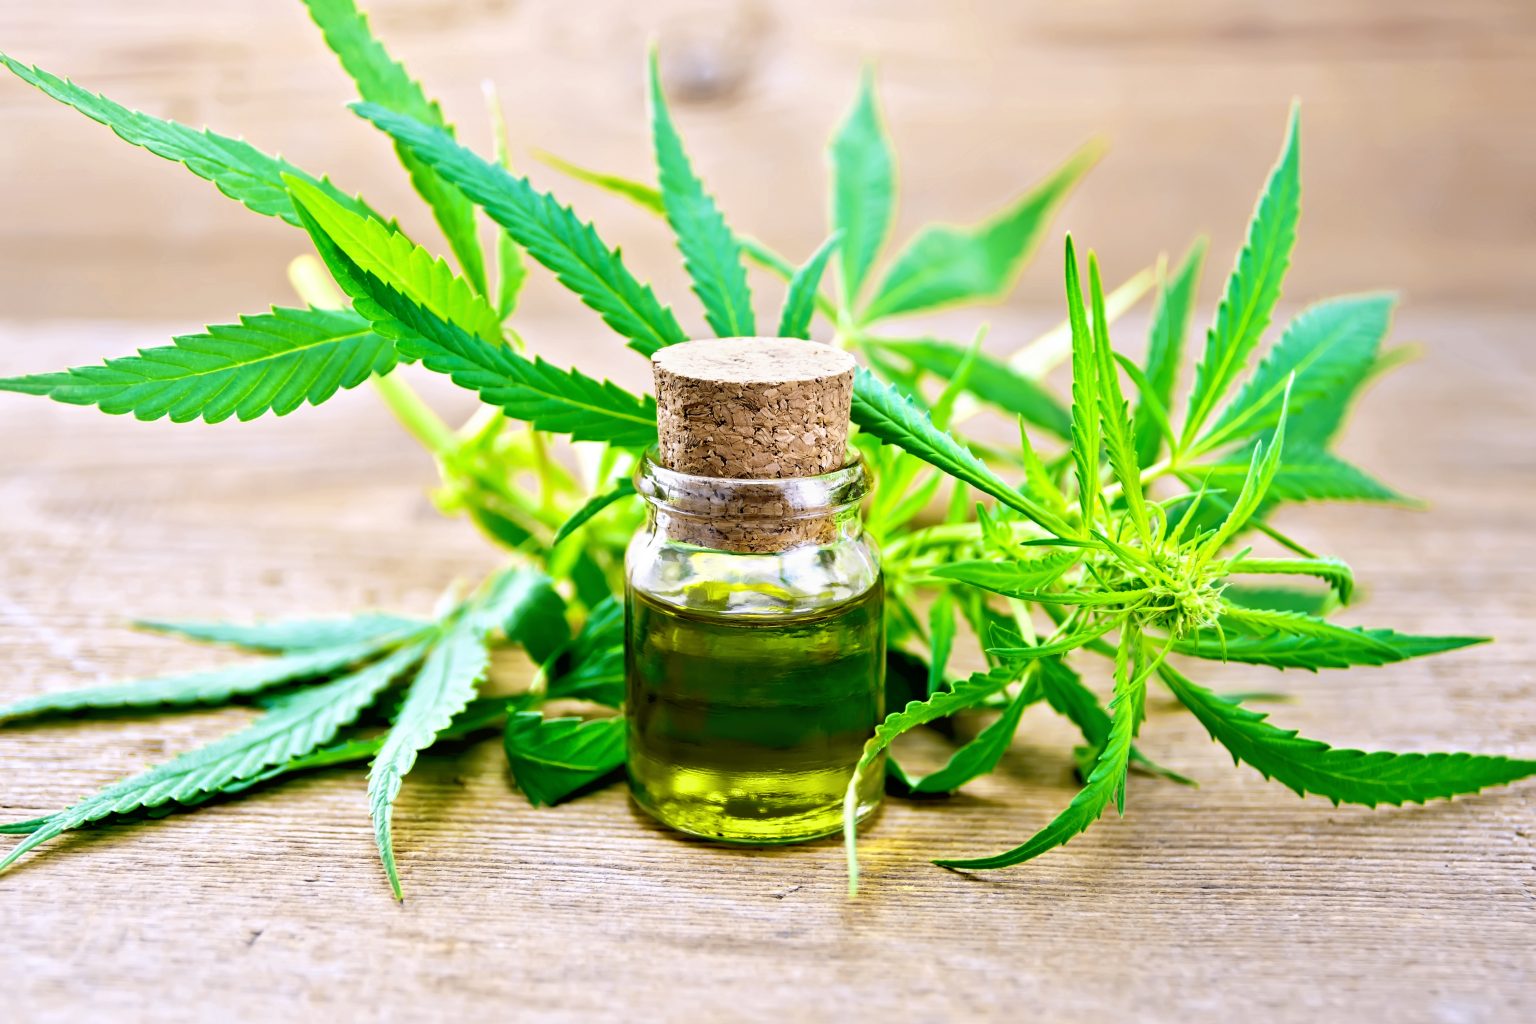 5 Ways to Seamlessly Introduce CBD to Your Daily Routine